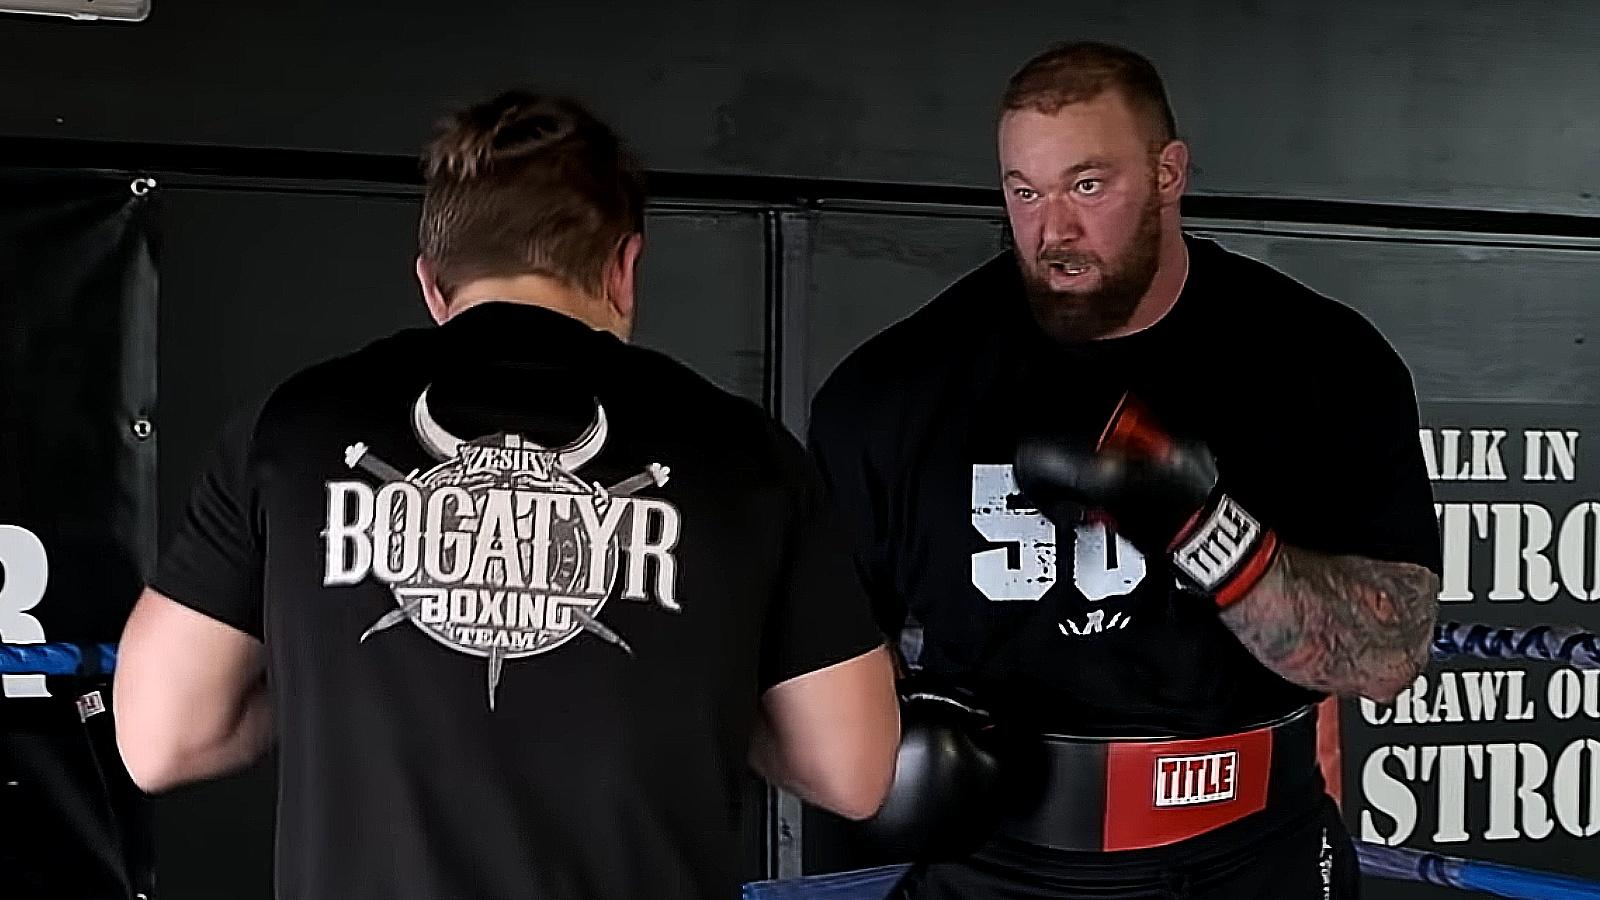 Thor The Mountain boxing sparring